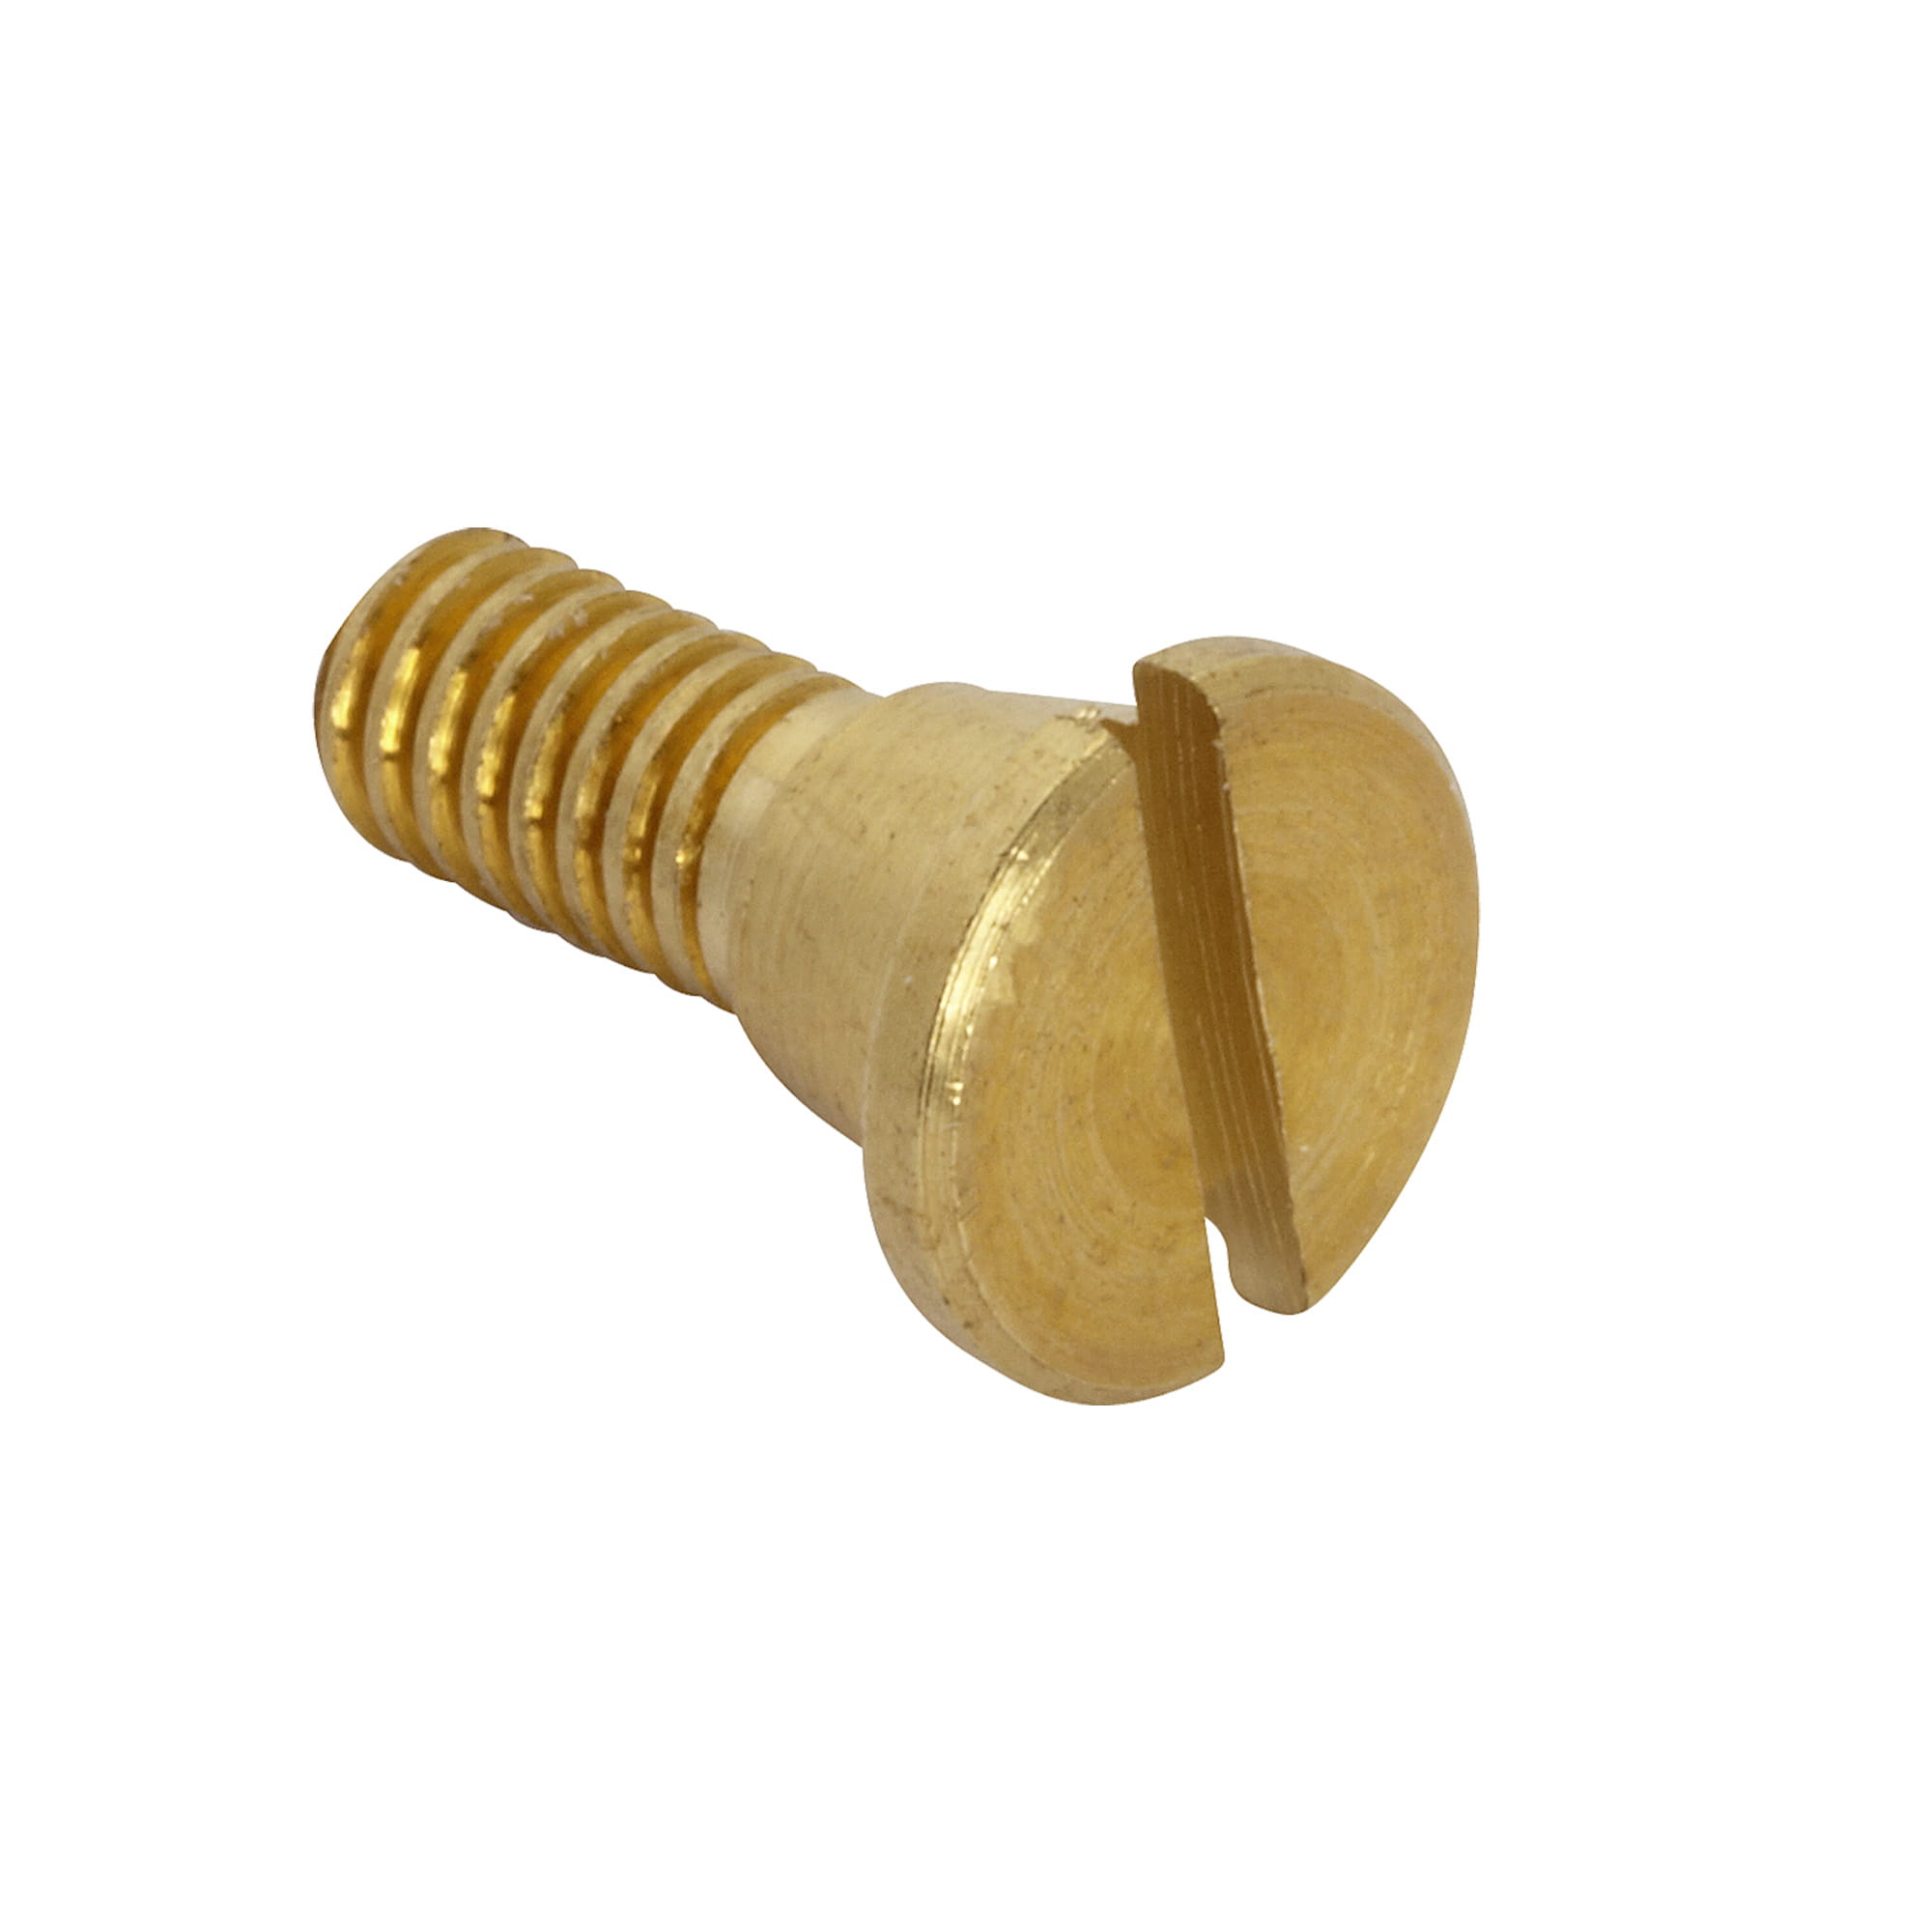 Bathroom and Laundy Faucet Handle Replacement Screw